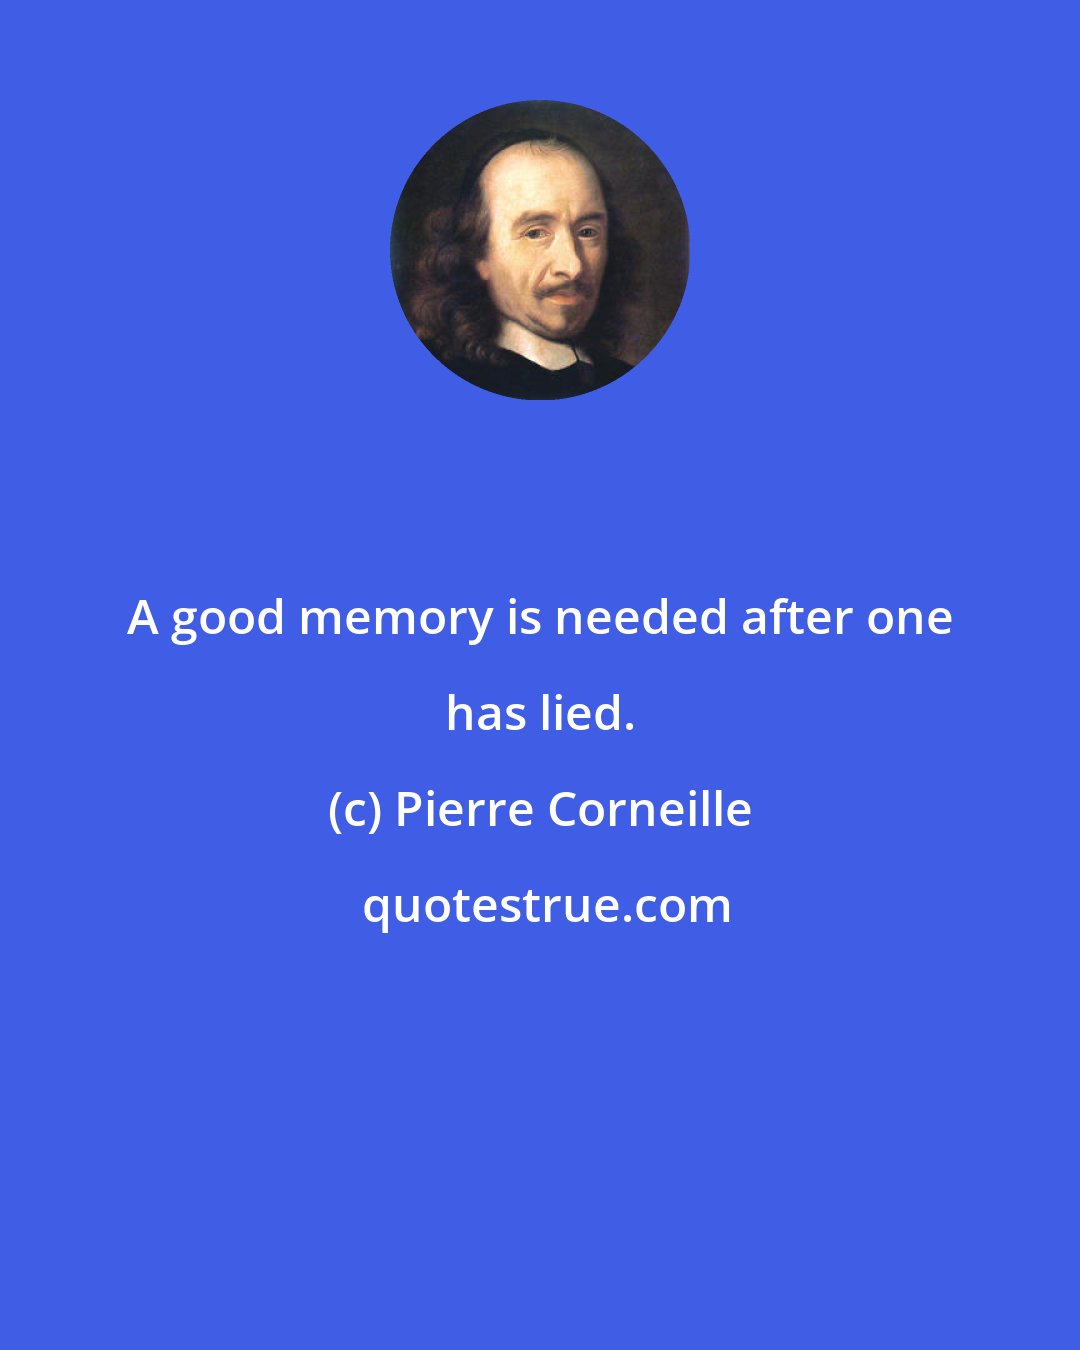 Pierre Corneille: A good memory is needed after one has lied.